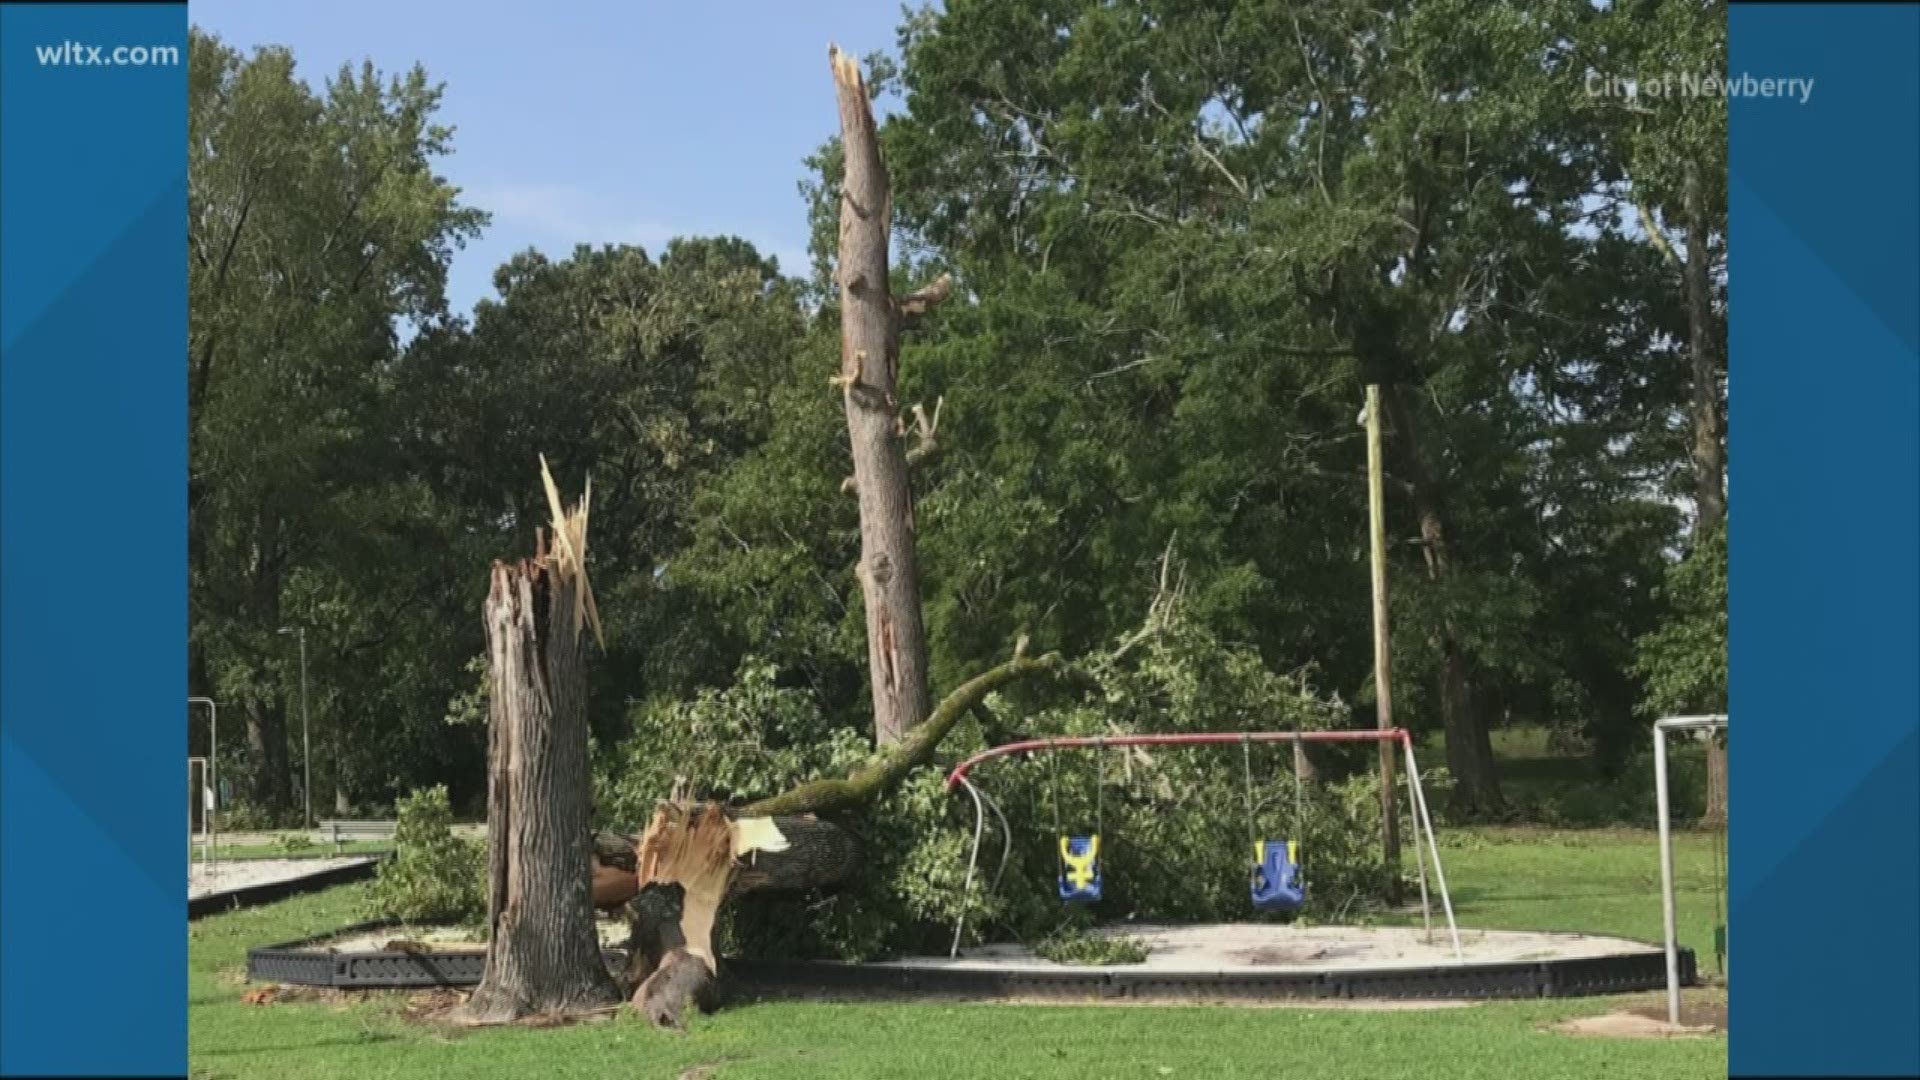 Six city parks in Newberry remain closed because of the storms that rolled in over the weekend.